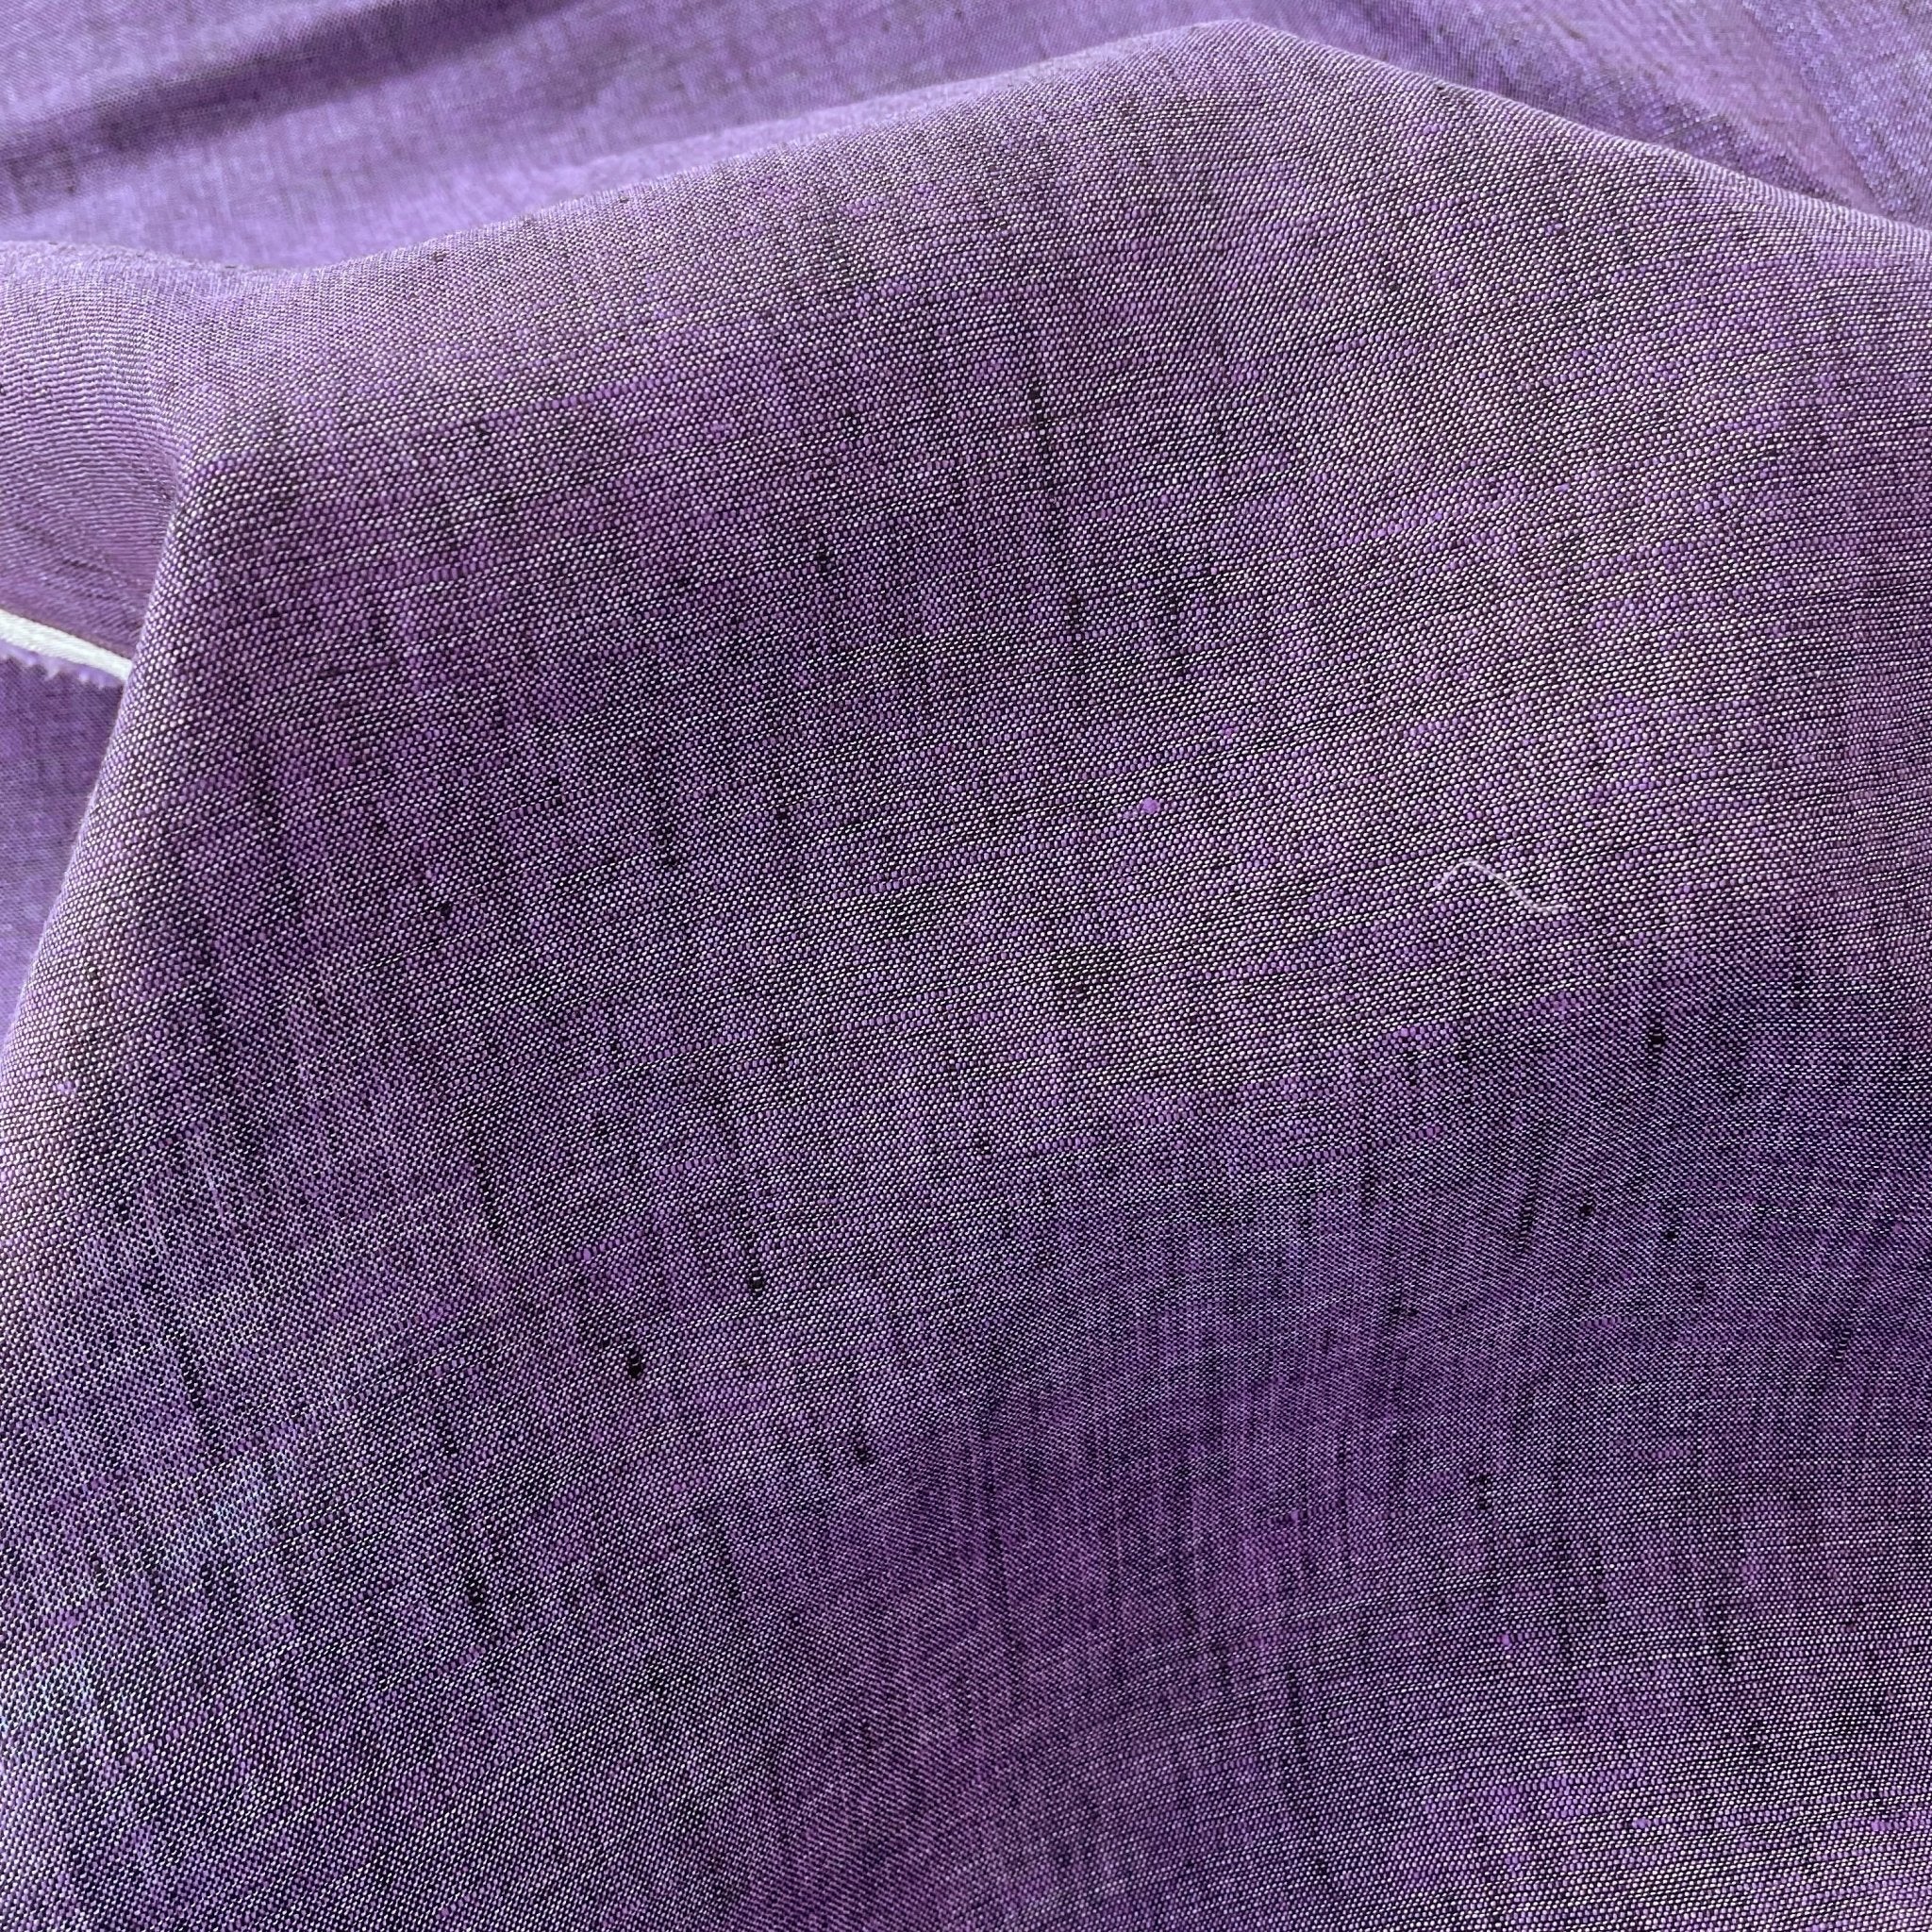 Linen Fabric Light Weight Soft Touch 21S 7042 6292 5968 7127 - The Linen Lab - Violet